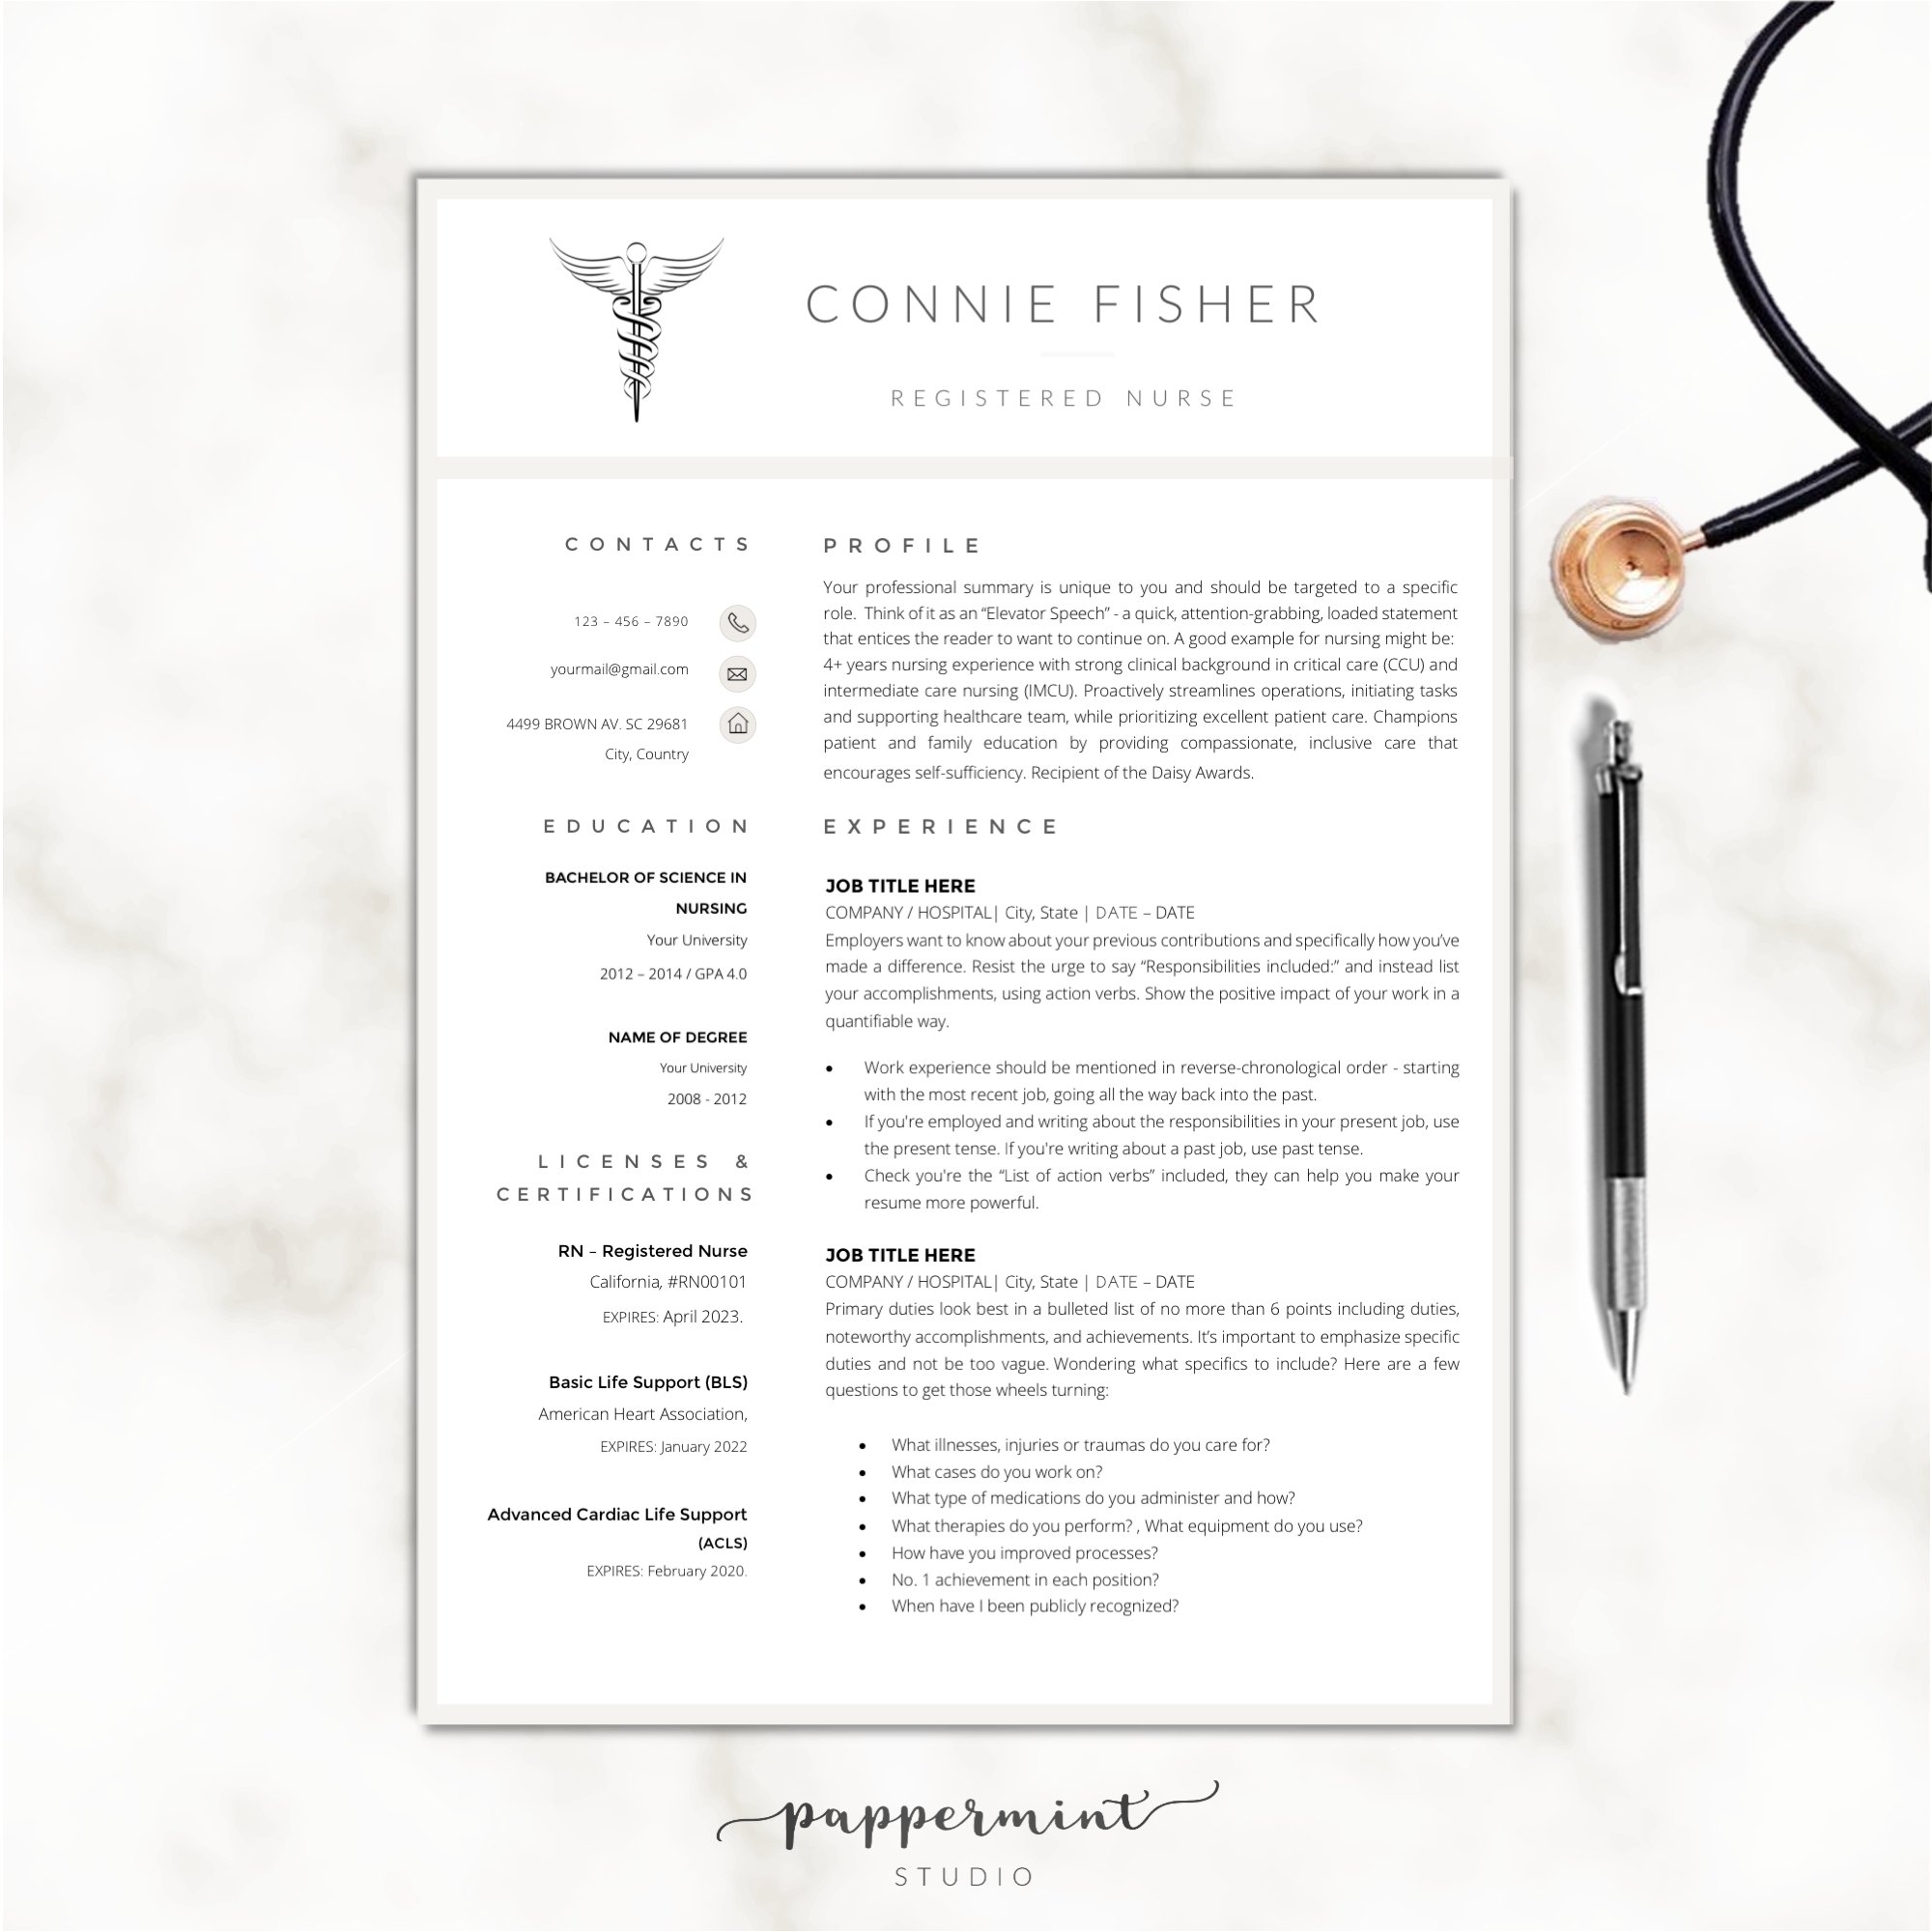 Professional nurse resume with a stethoscope on top of it.